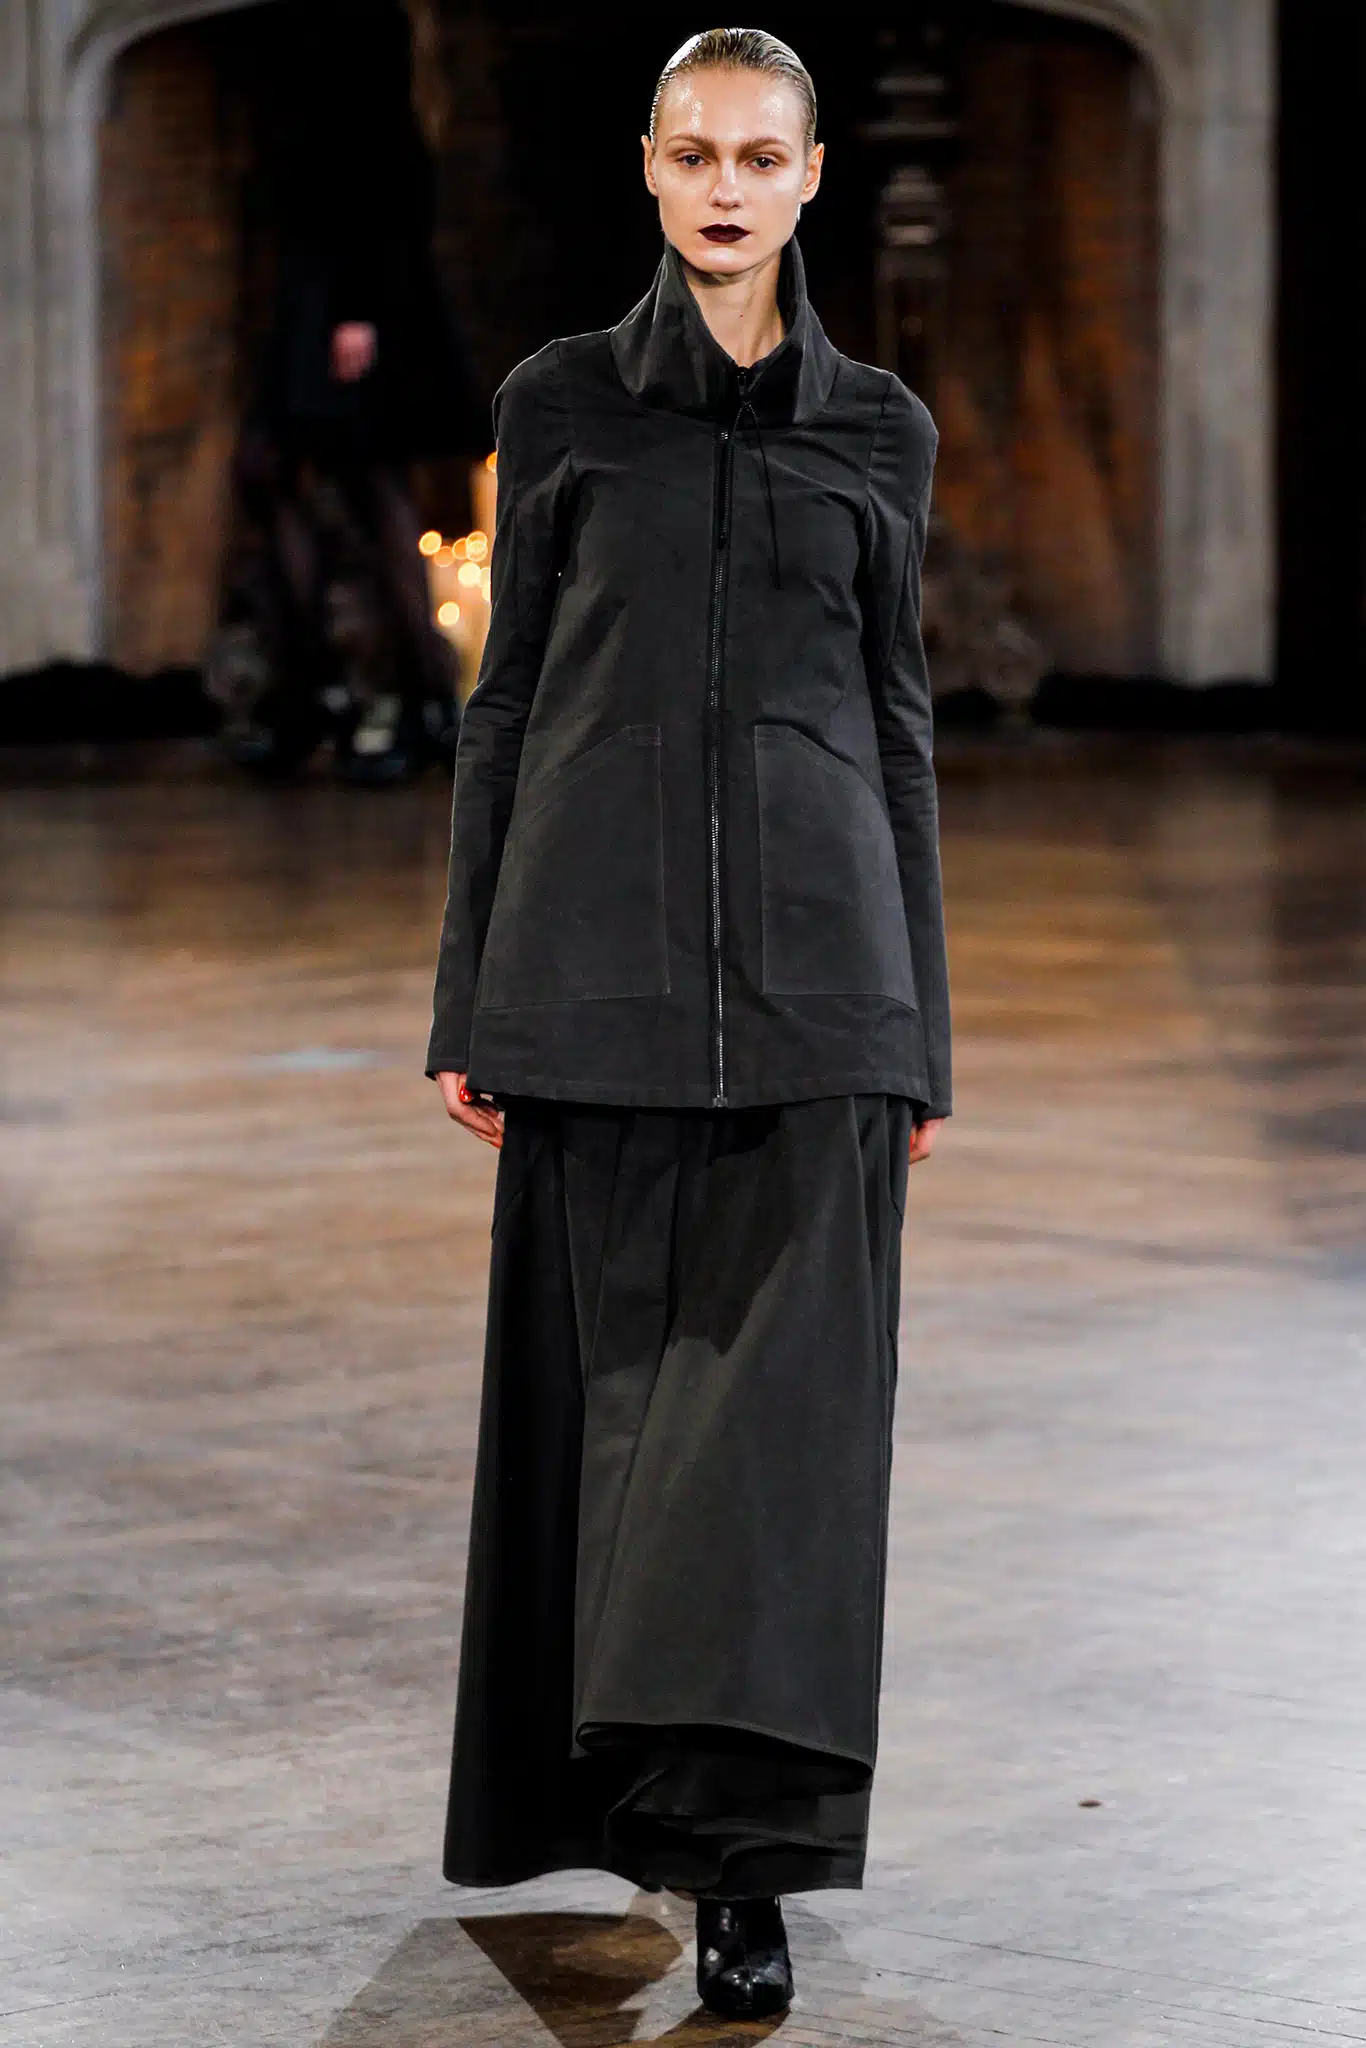 Image from FW14 SHOW Collection